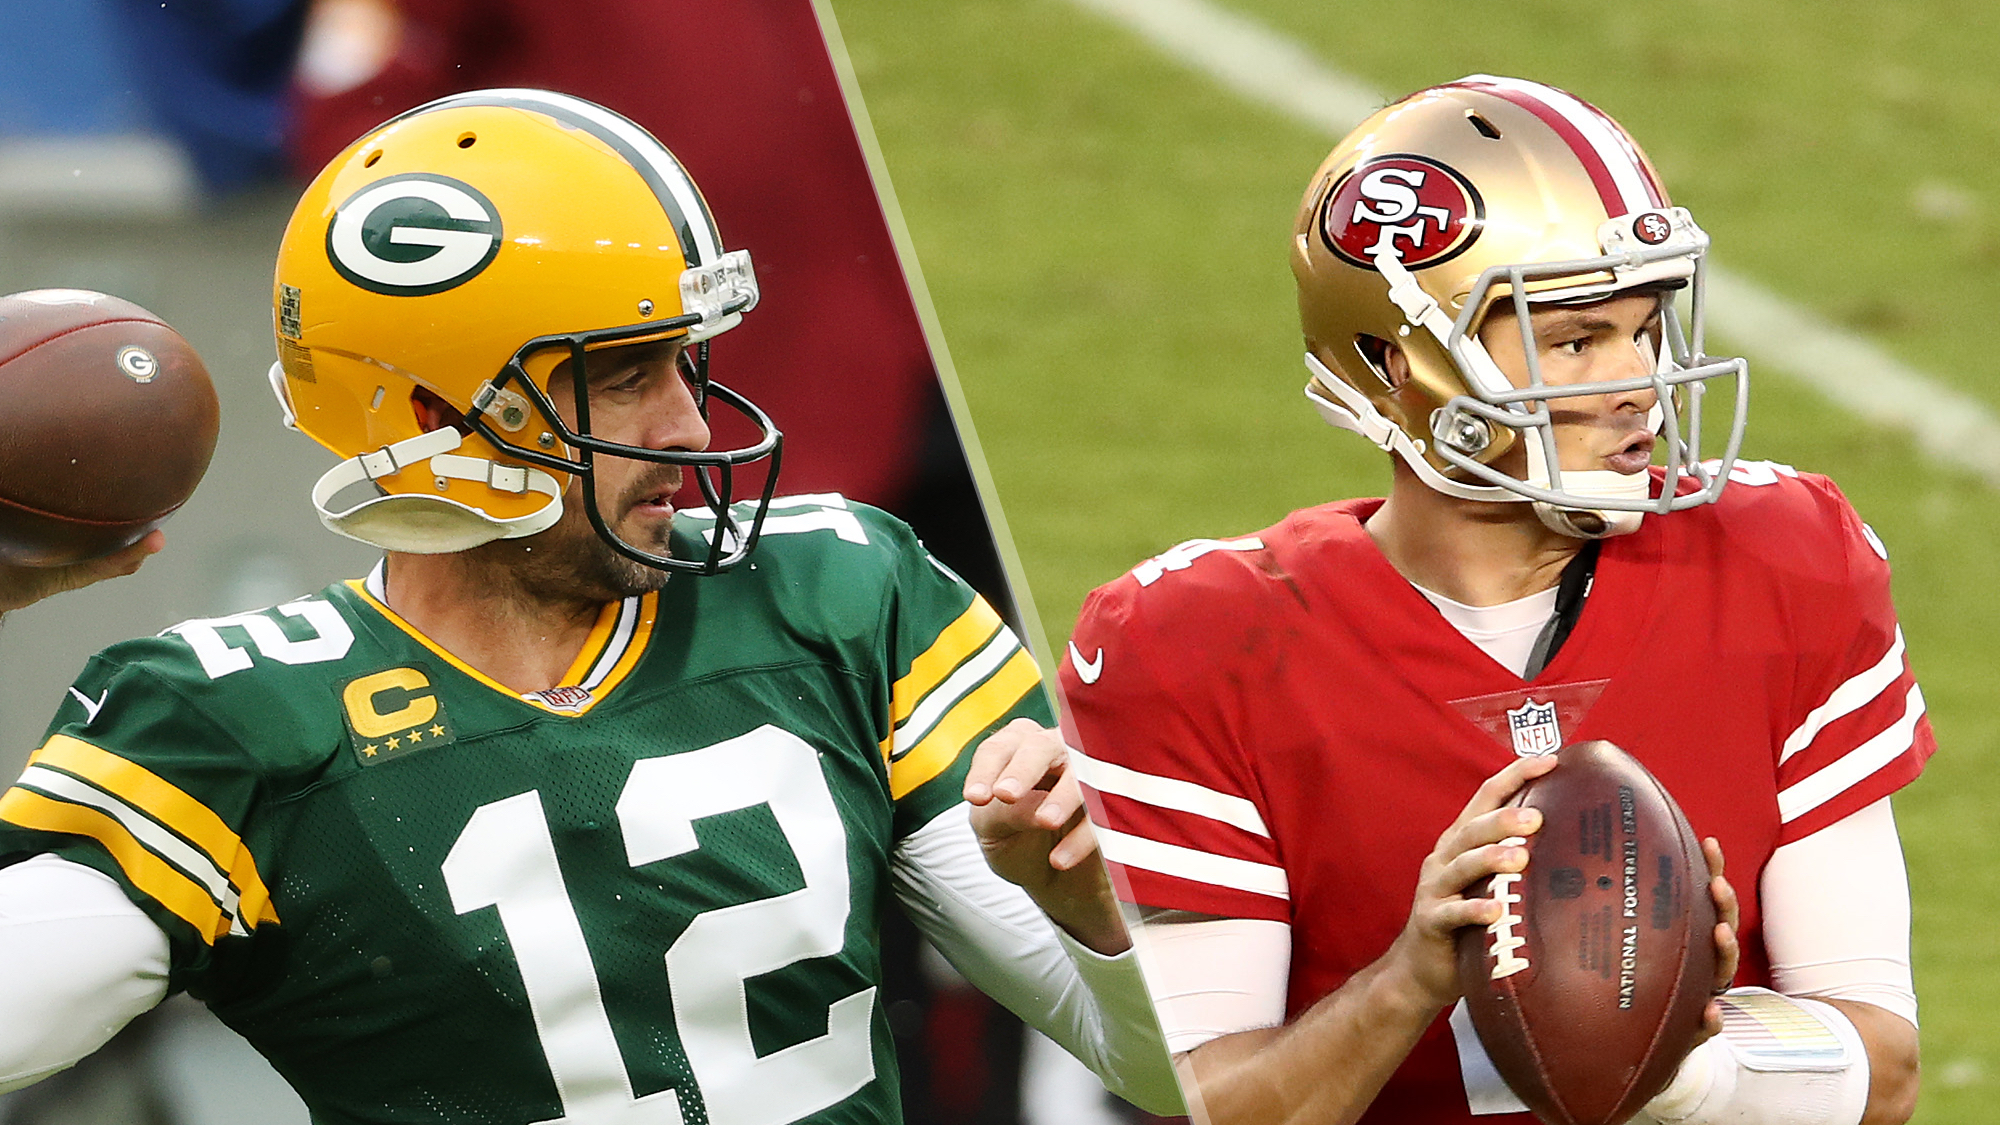 where to watch packers vs 49ers